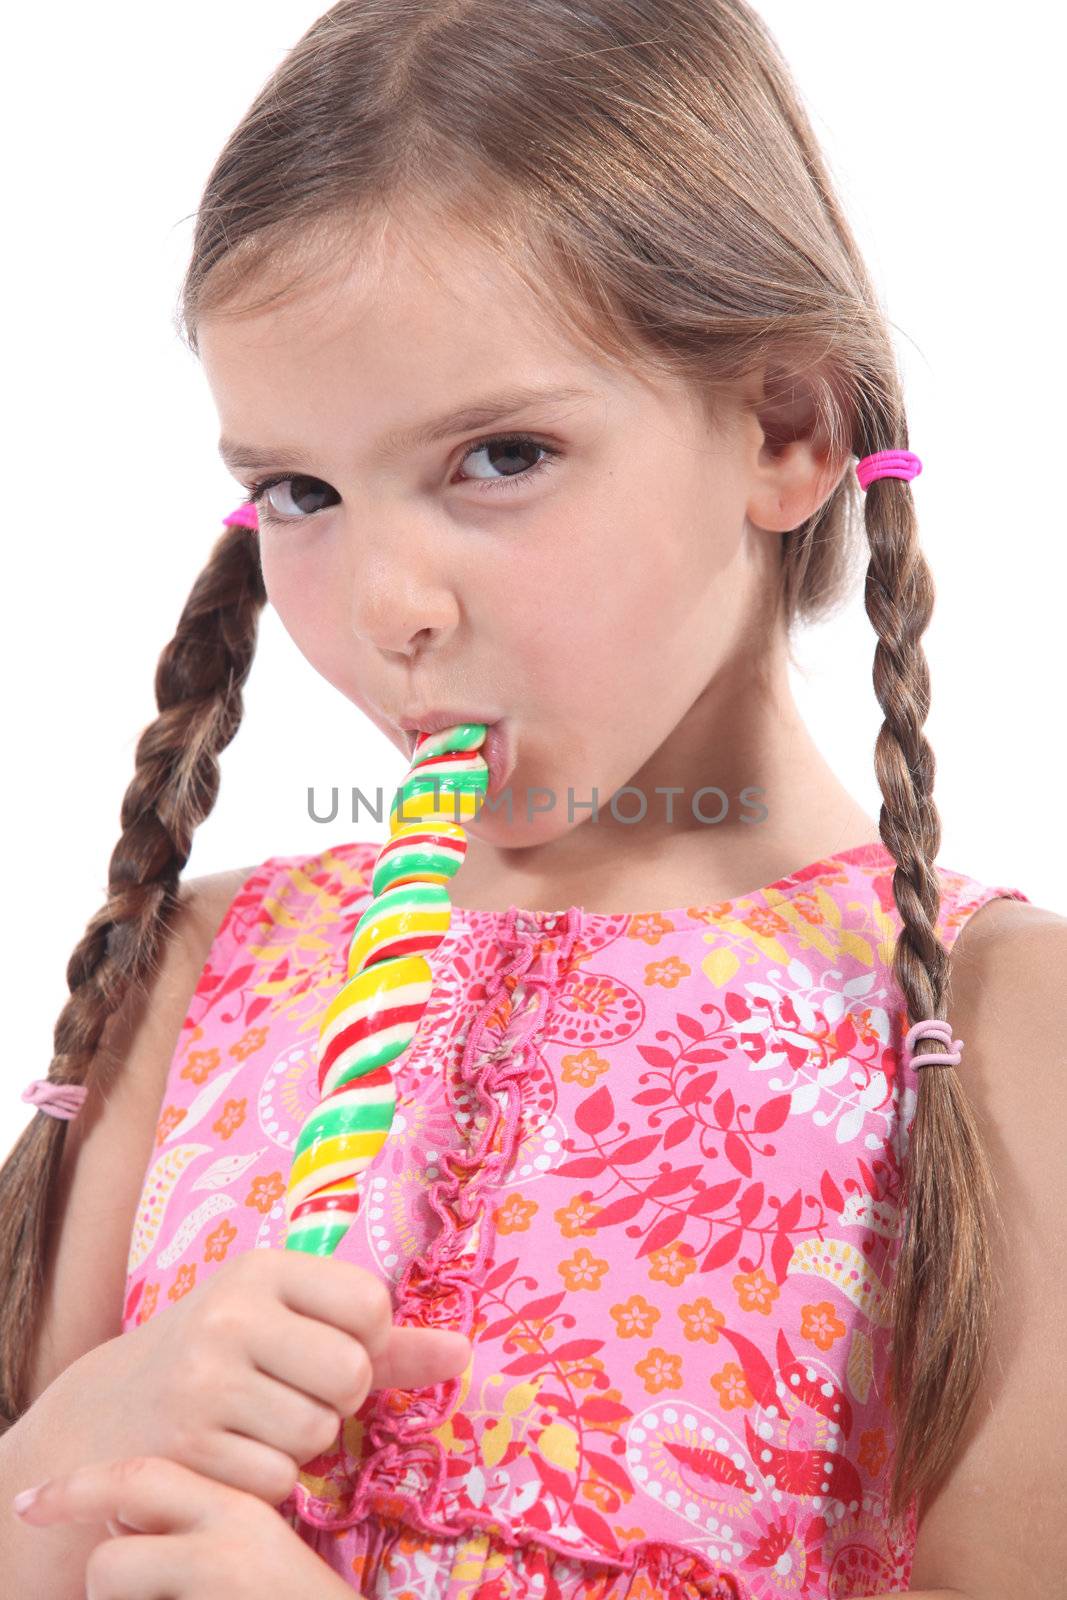 Girl sucking on a candy stick